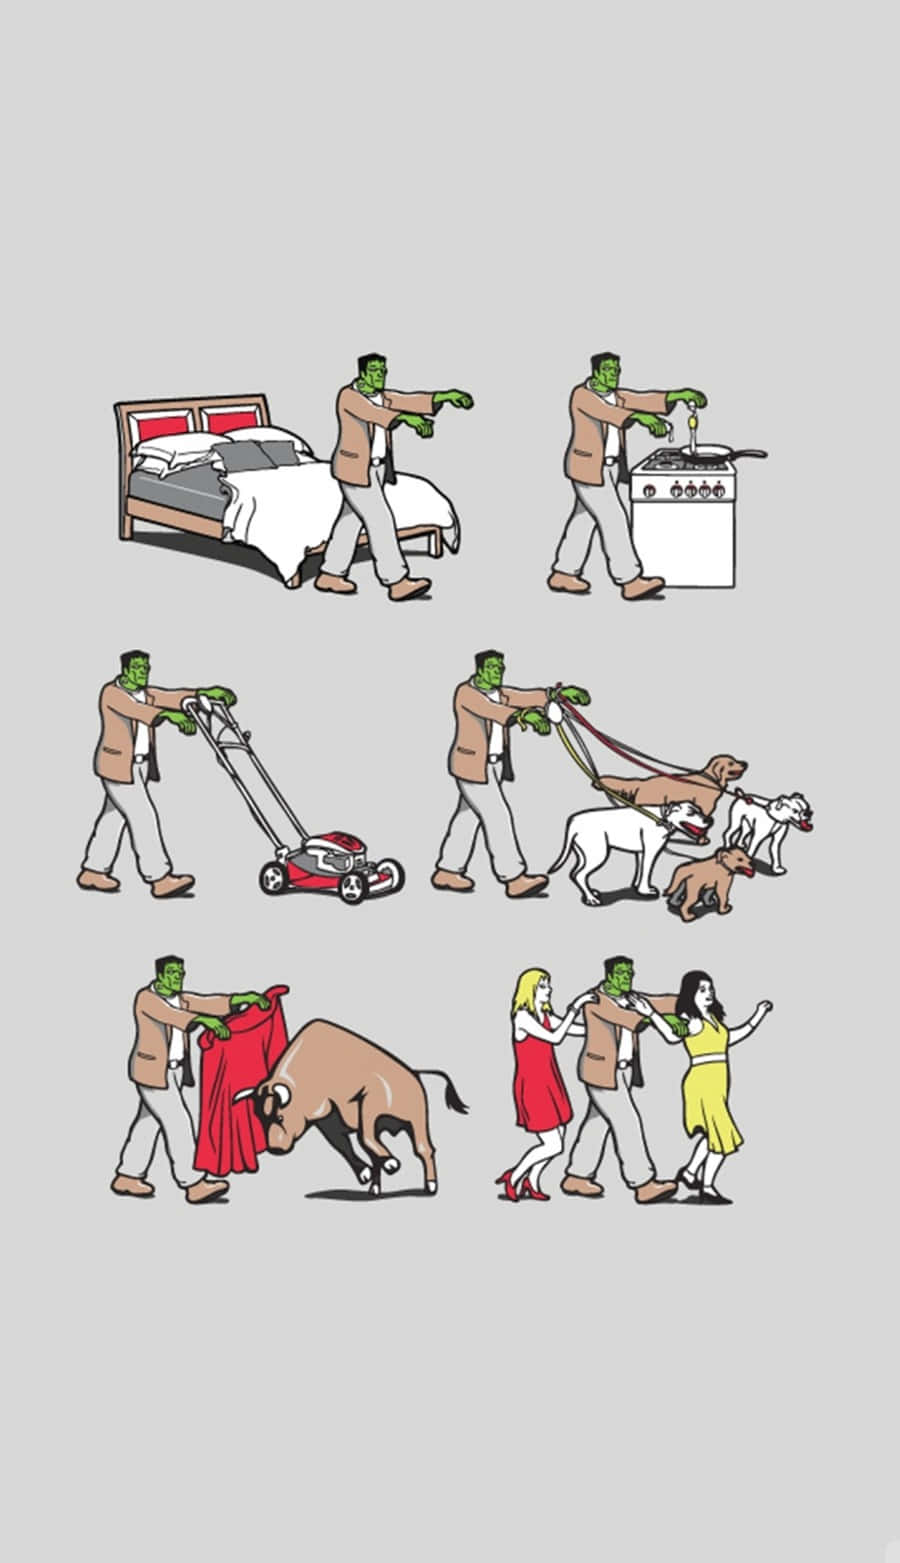 A Cartoon Of People Pulling A Dog And A Man Wallpaper